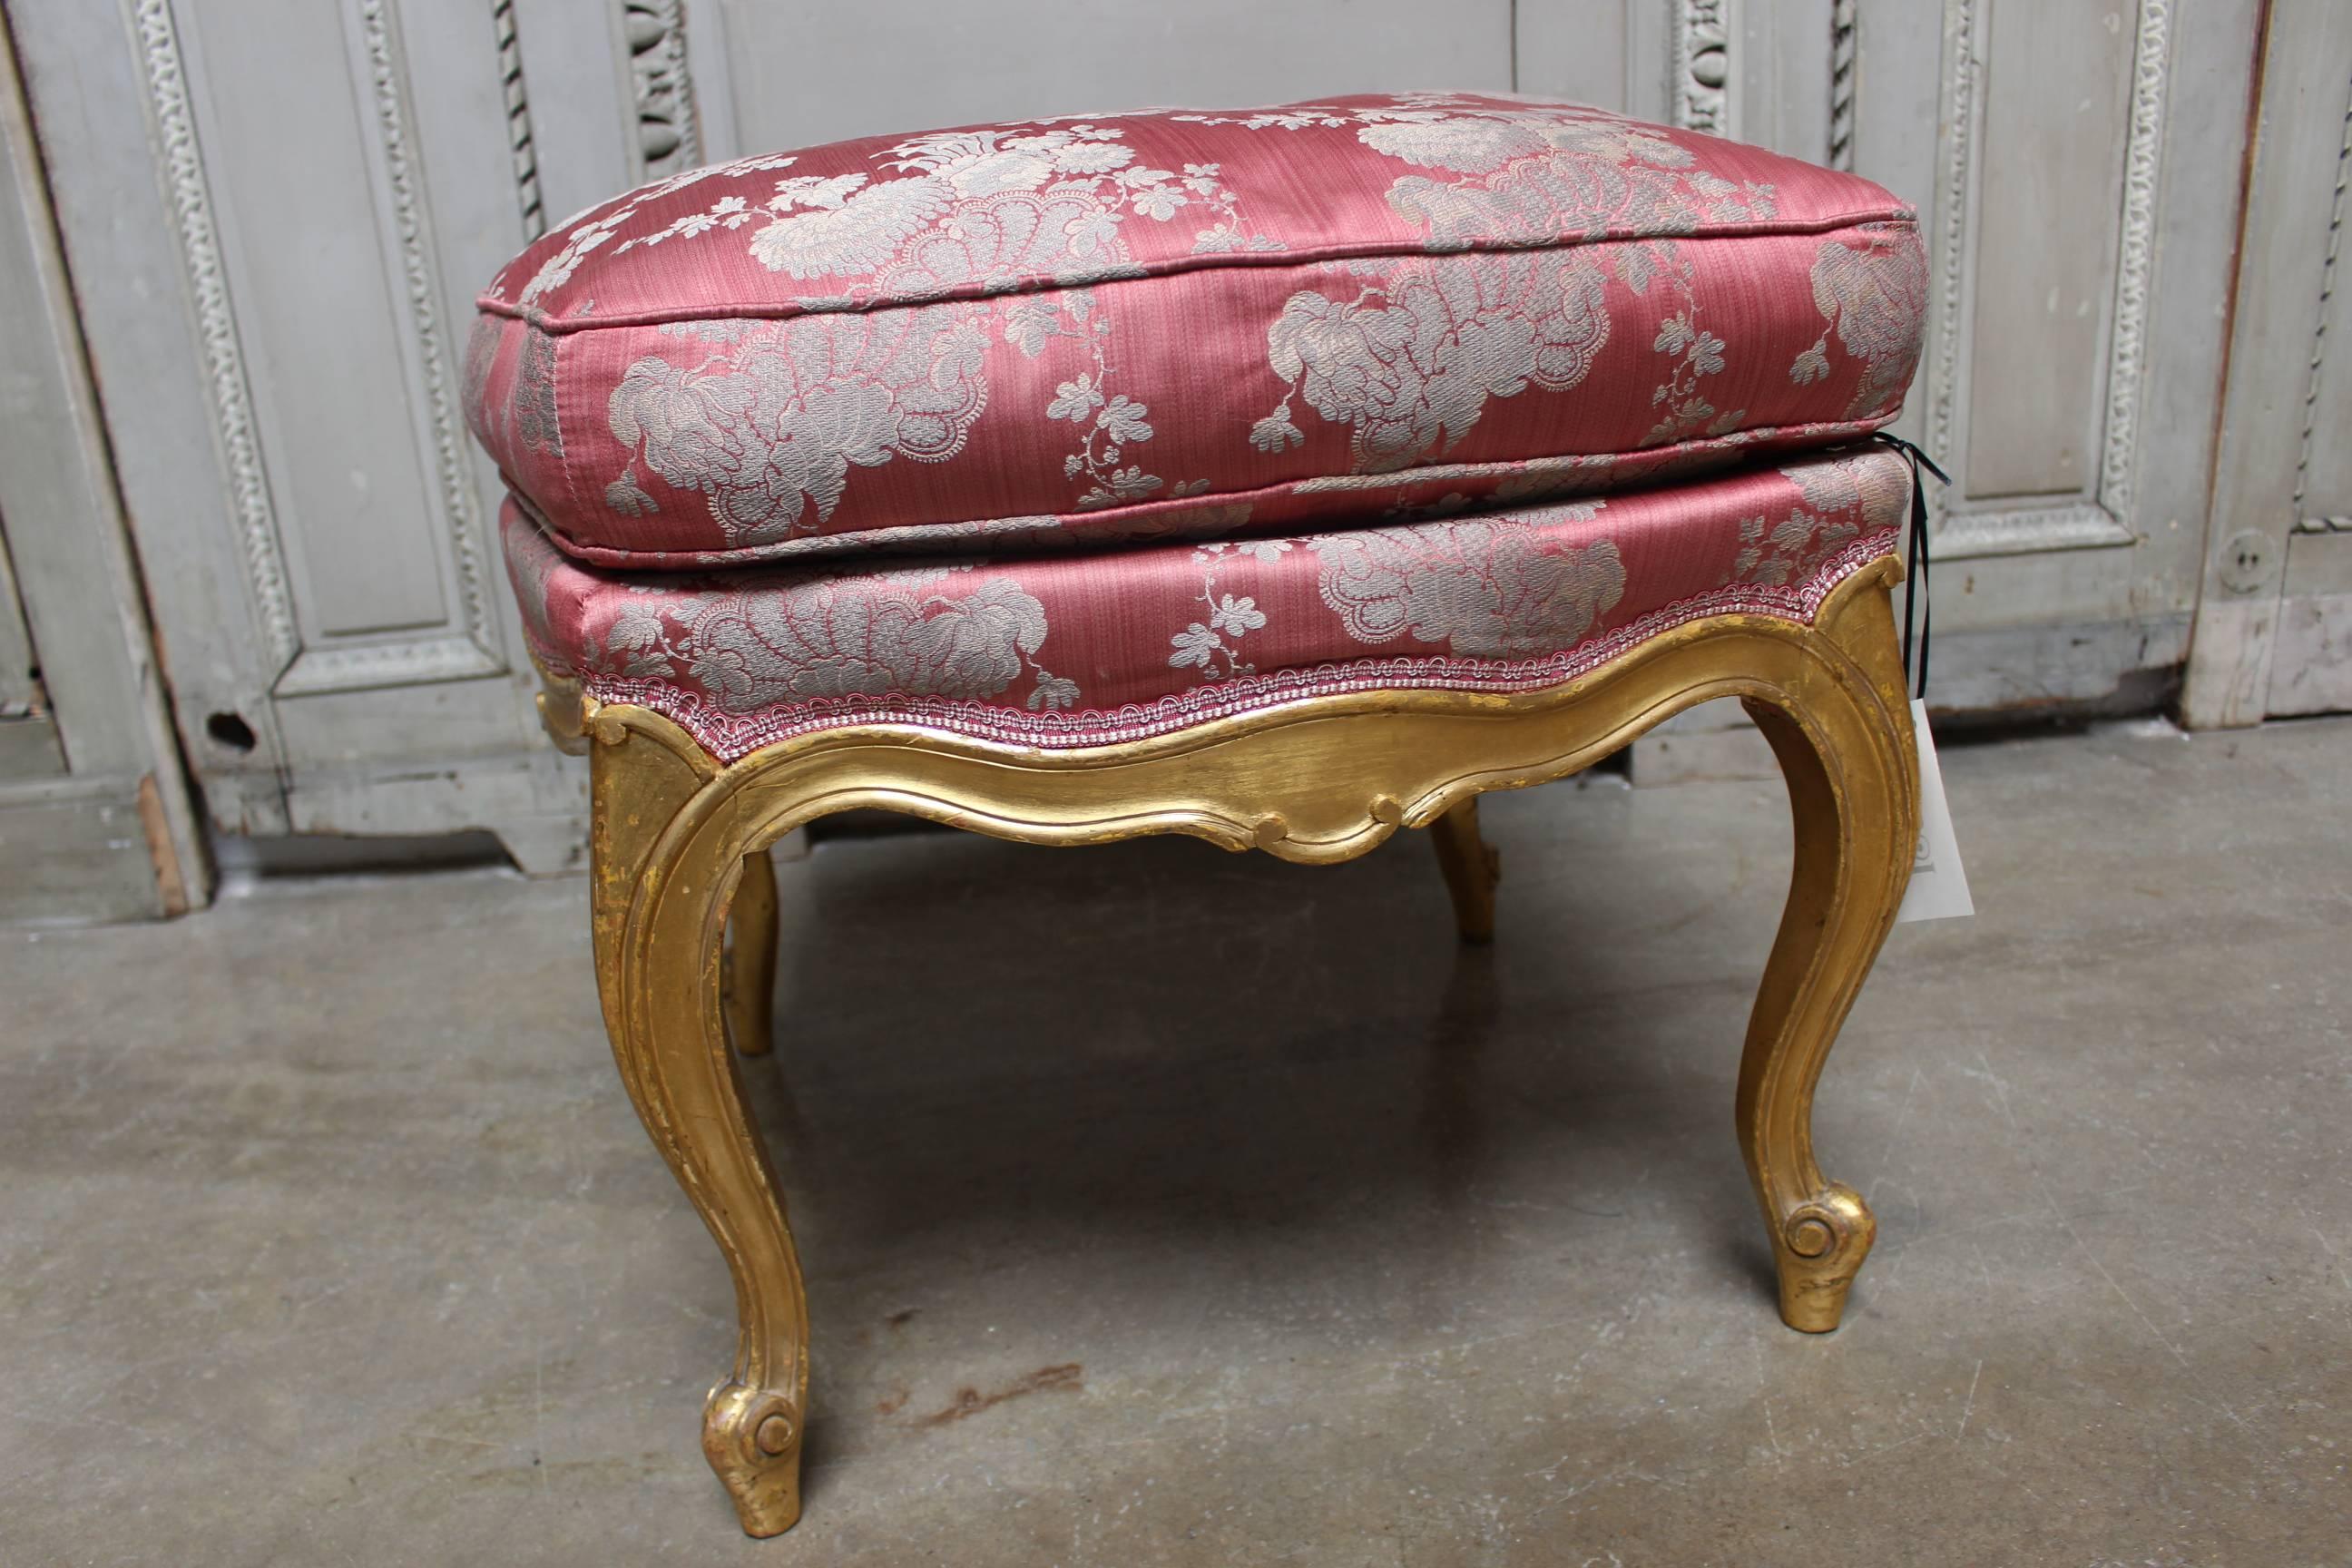 A French Louis XV style tabouret with a gold leaf finish.